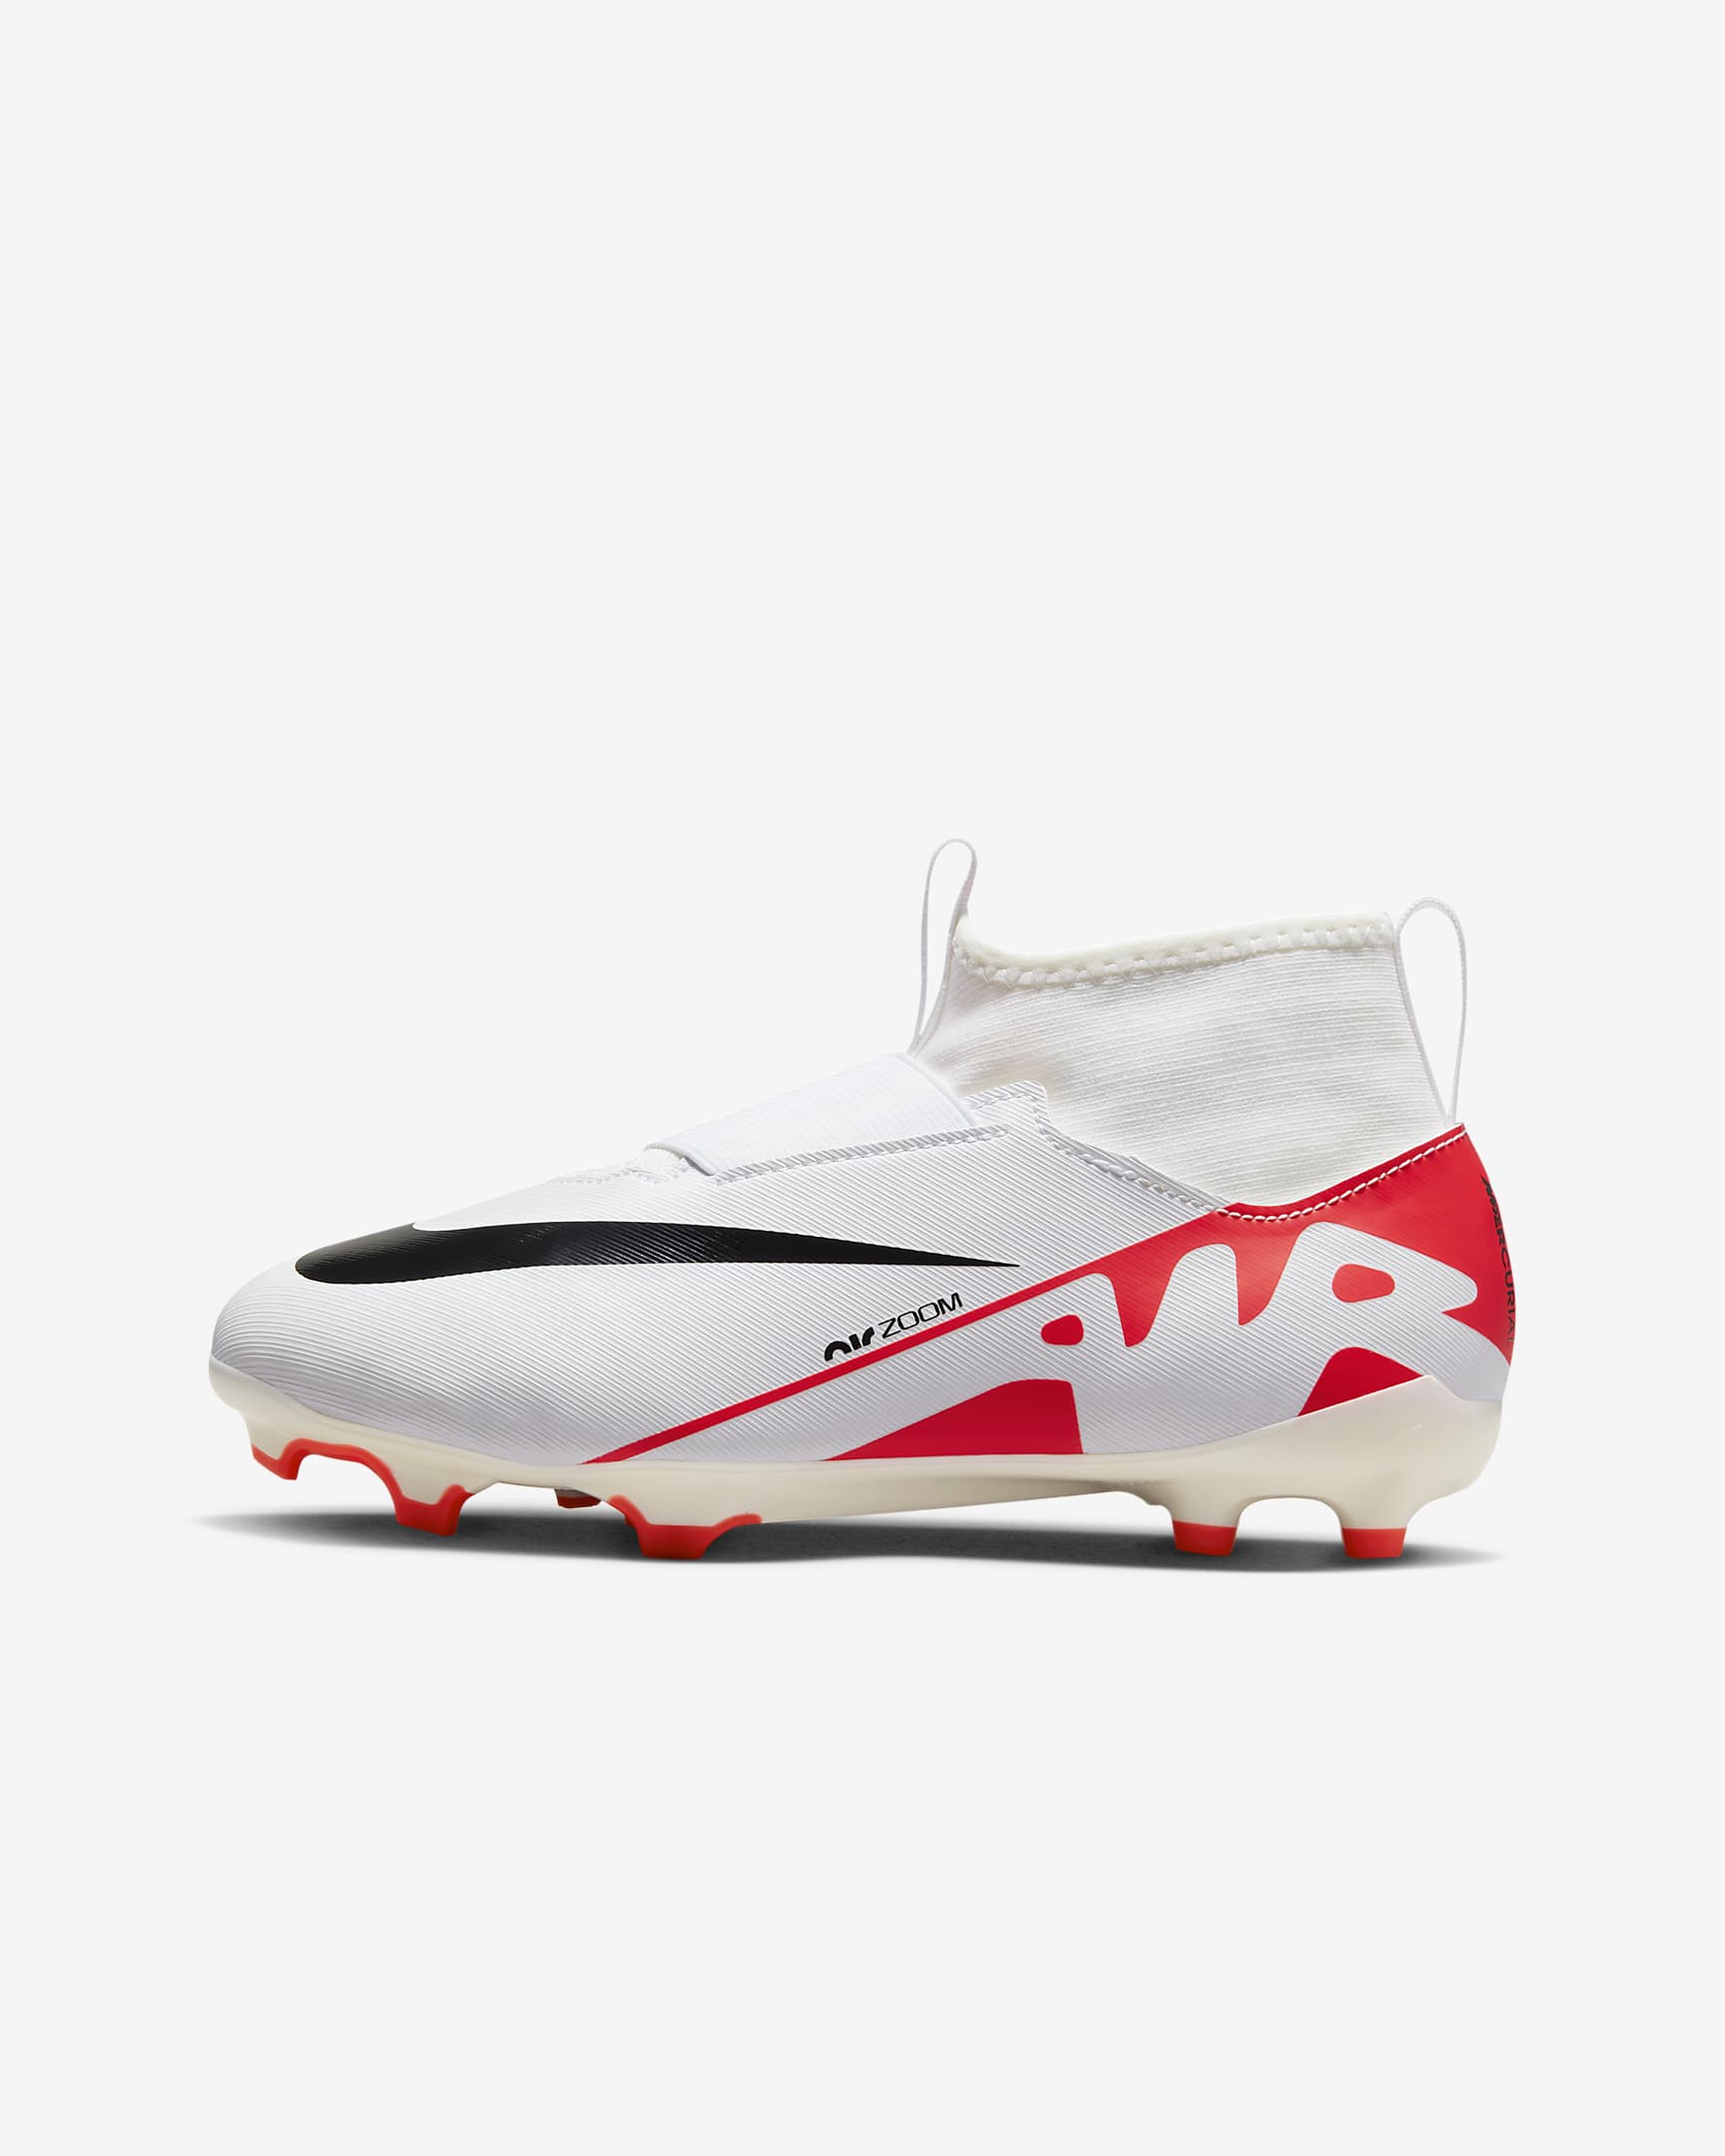 Nike Jr. Mercurial Superfly 9 Academy Younger/Older Kids' Multi-Ground High-Top Football Boot - Bright Crimson/Black/White